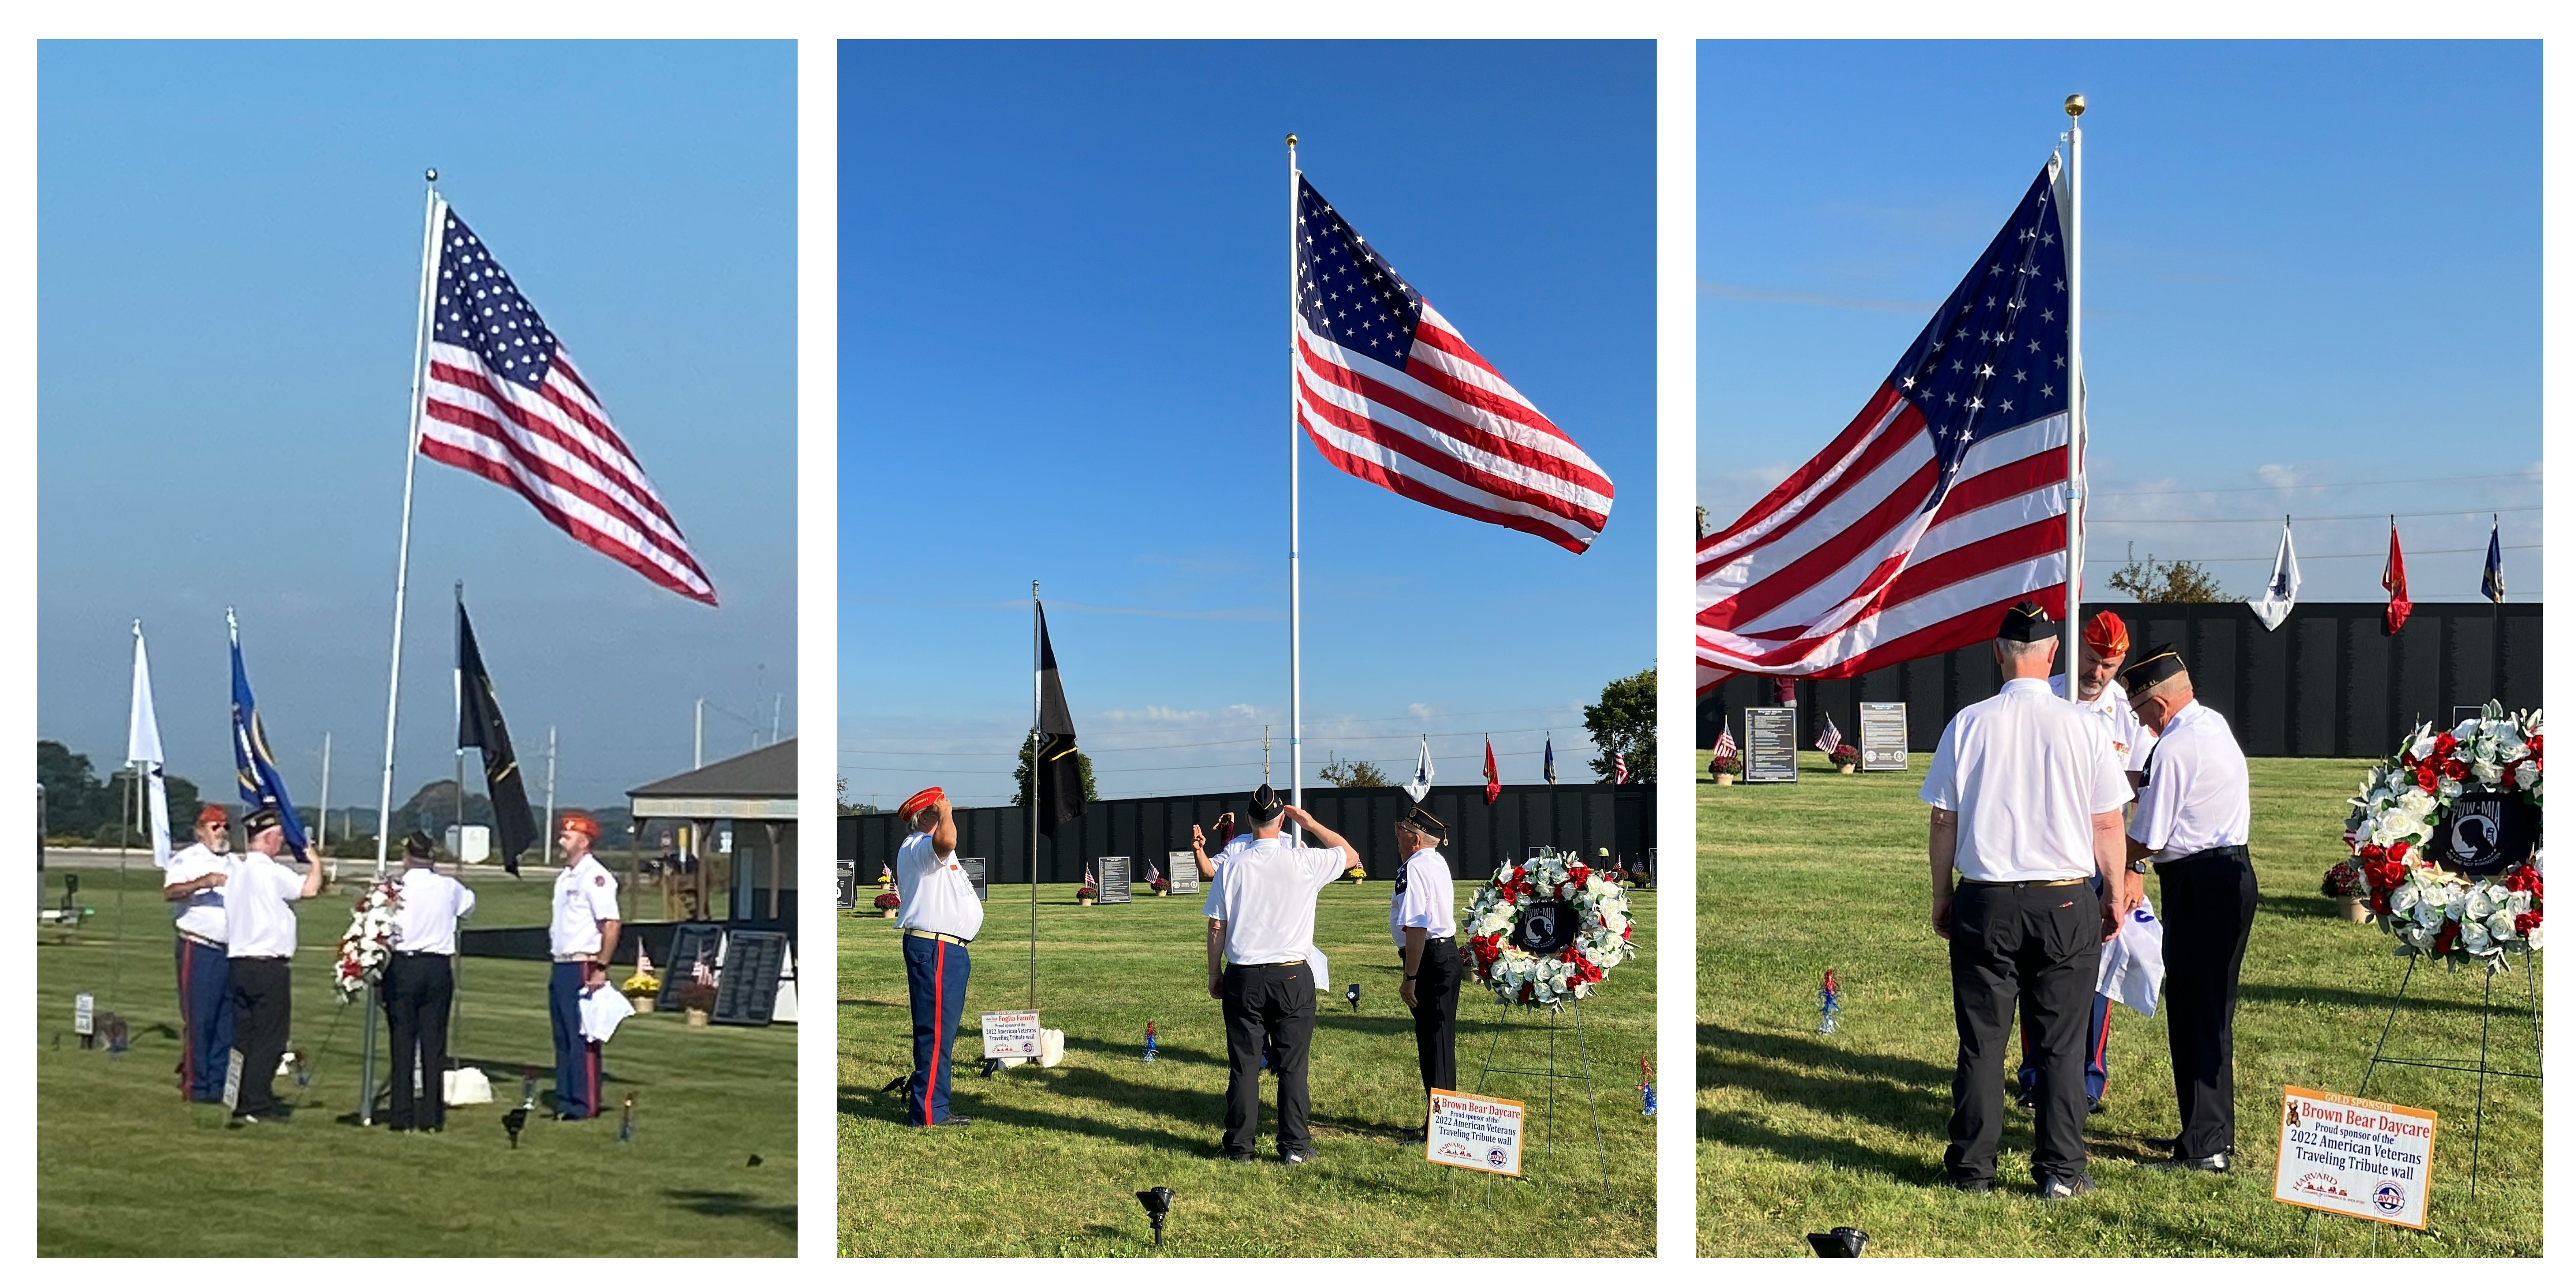 Numerous local and county American Legion veterans pay their respect as they help raise and lower the American flag throughout the weekend.